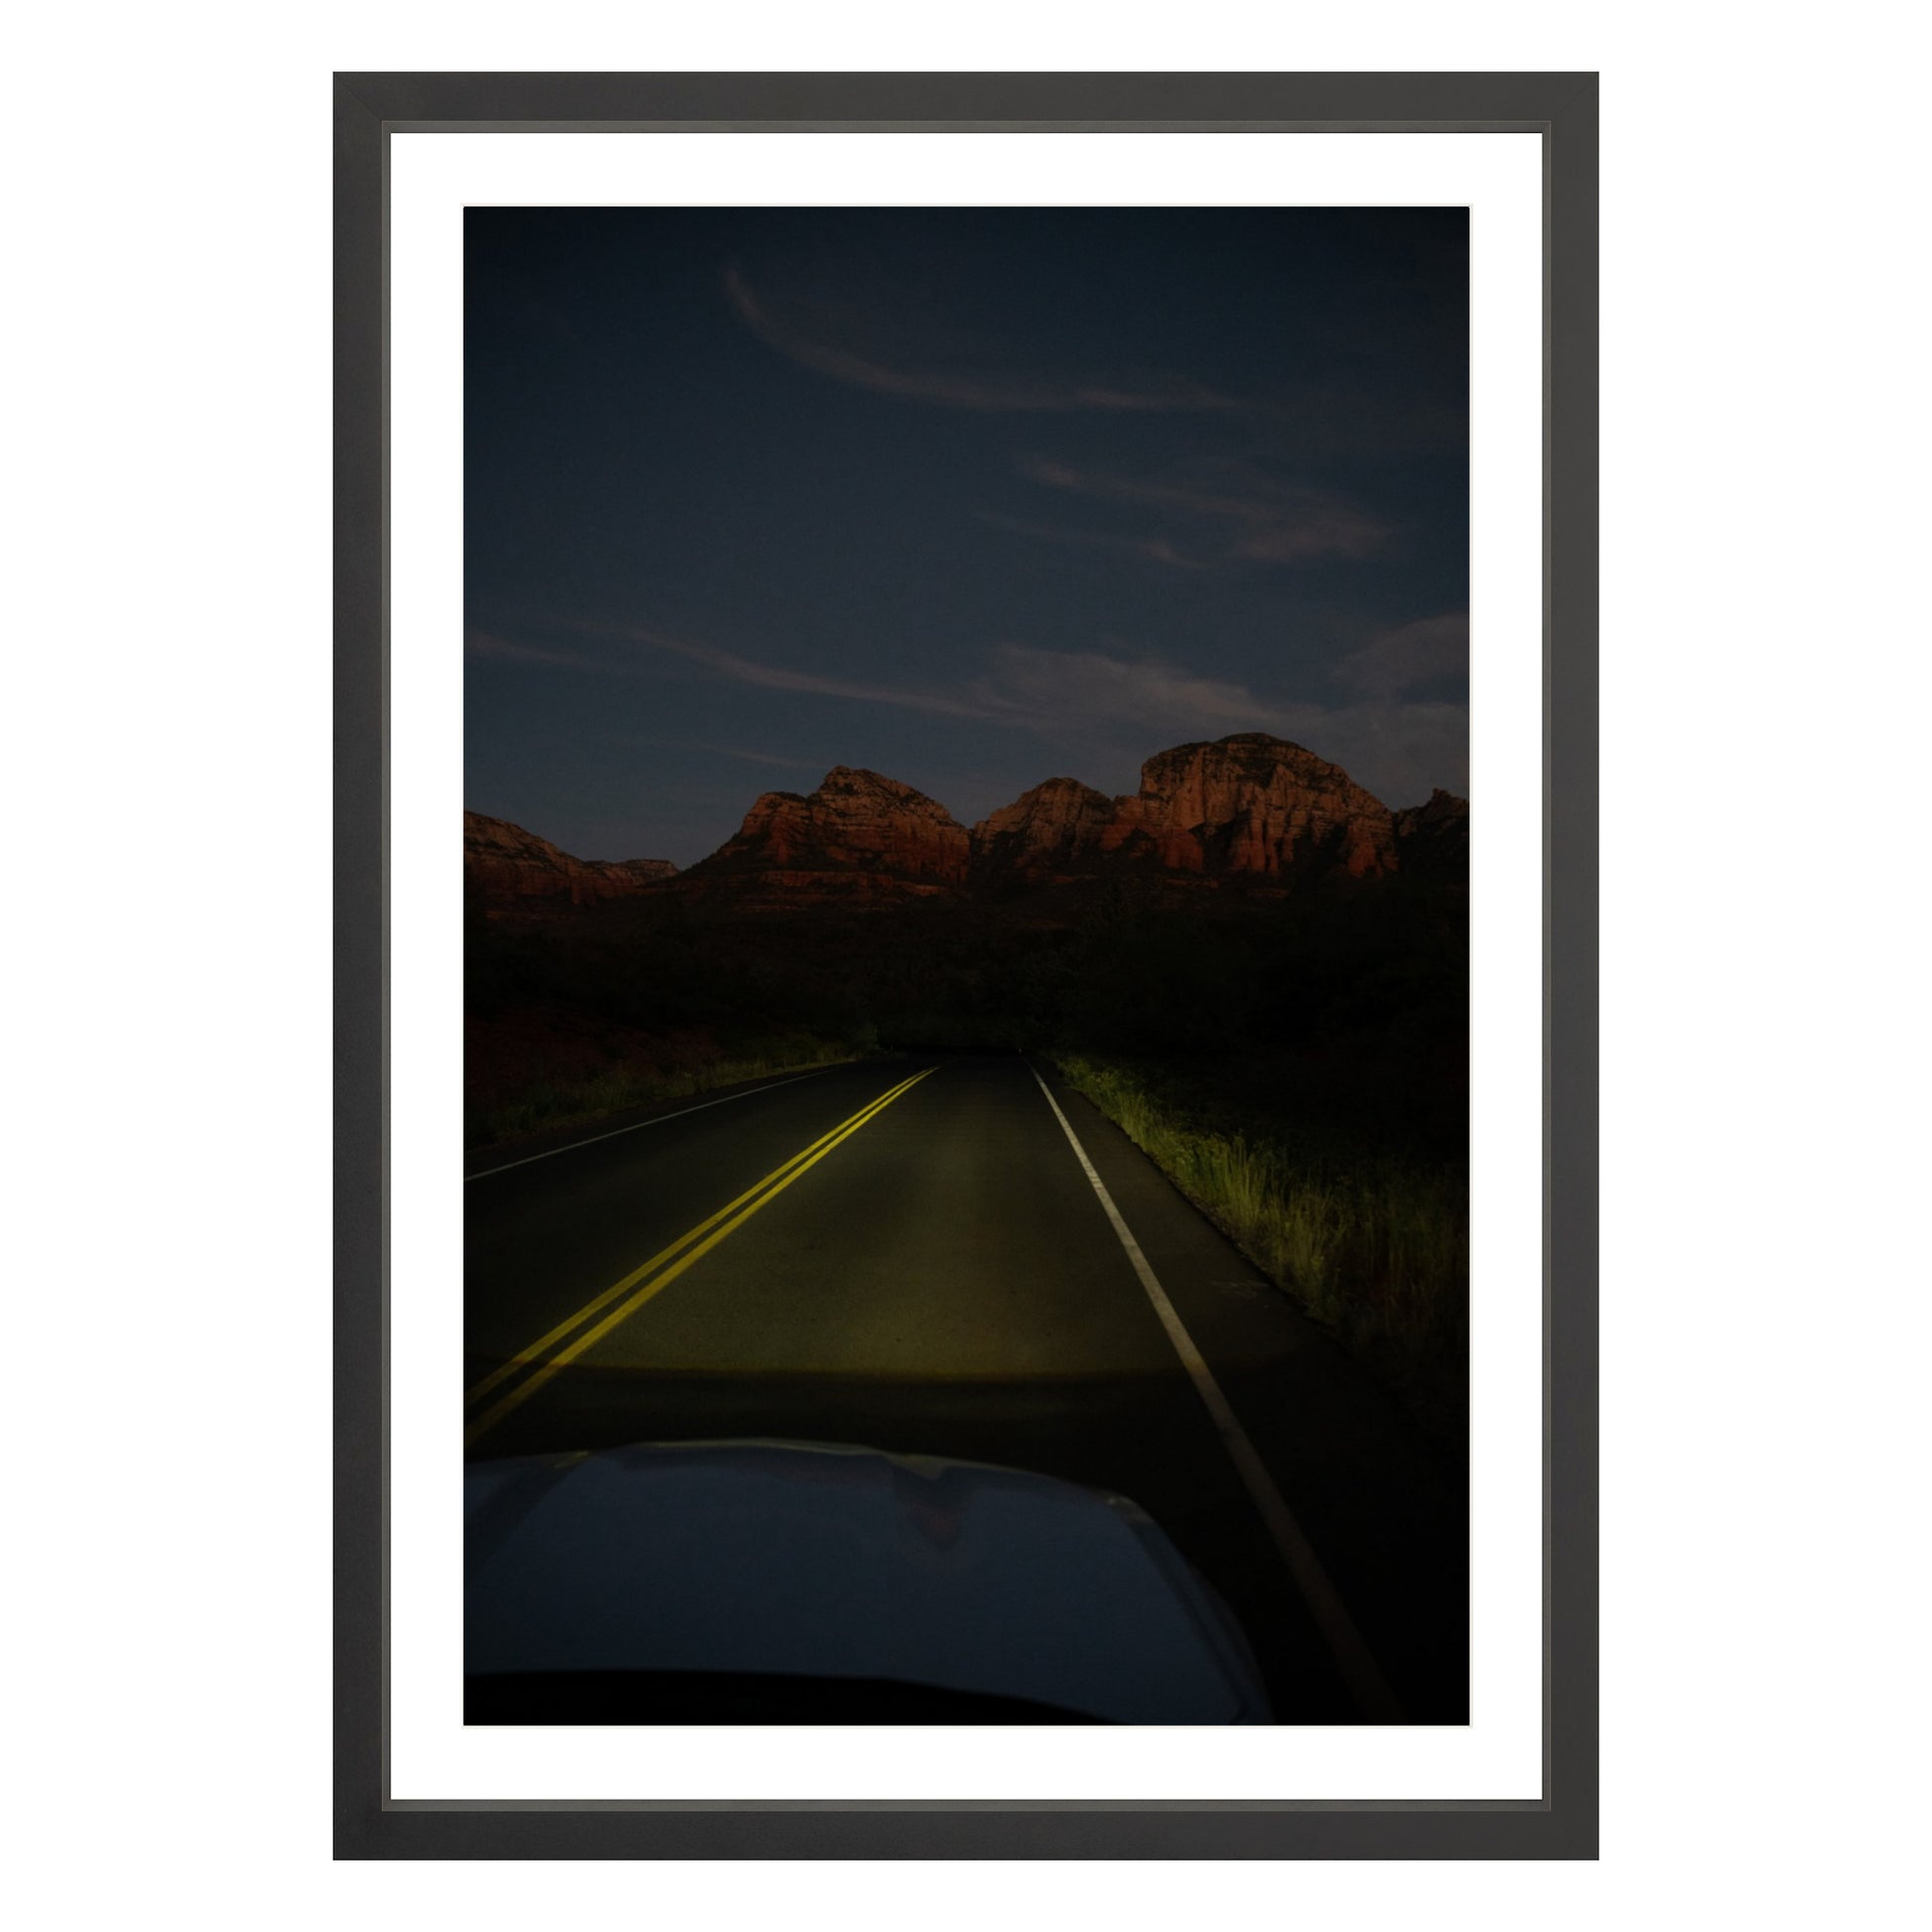 Photograph of a highway and mountains at night in Sedona Arizona framed in black with white mat